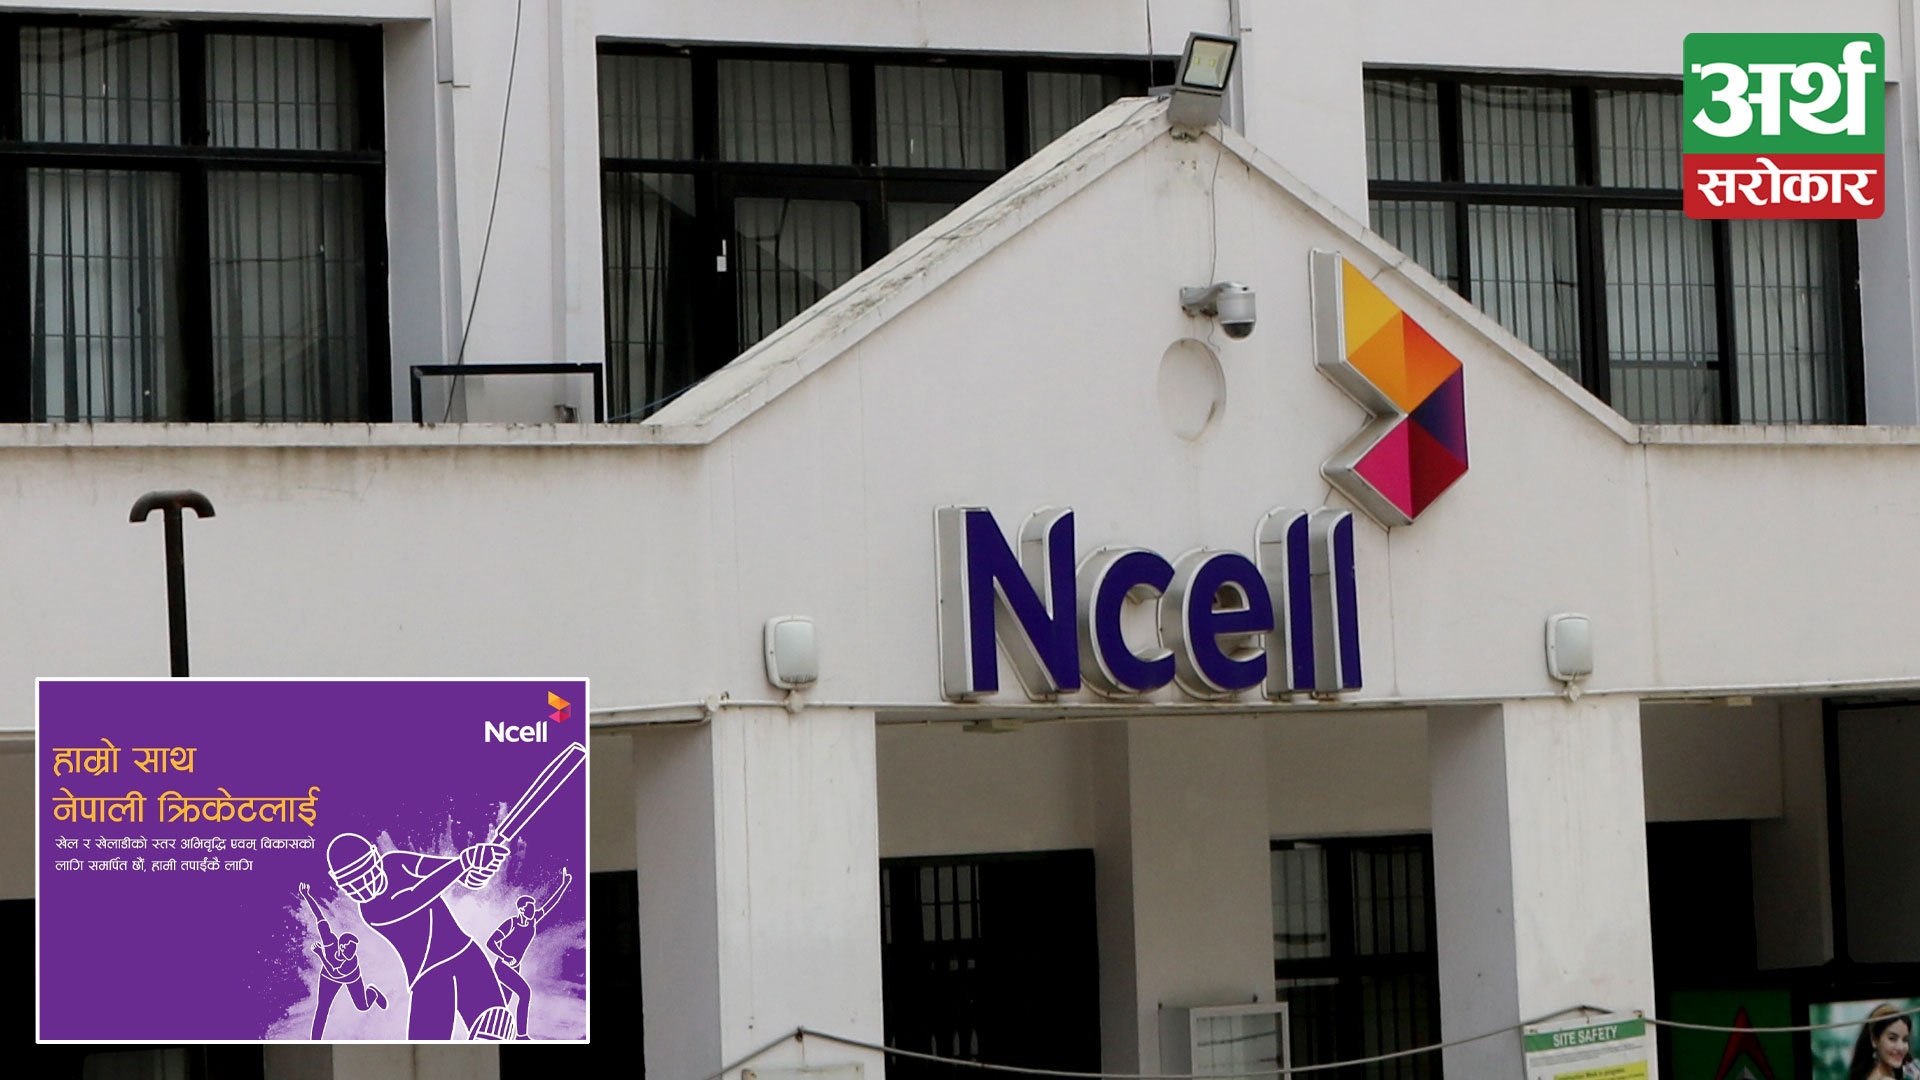 Ncell’s ongoing commitment to fostering sports